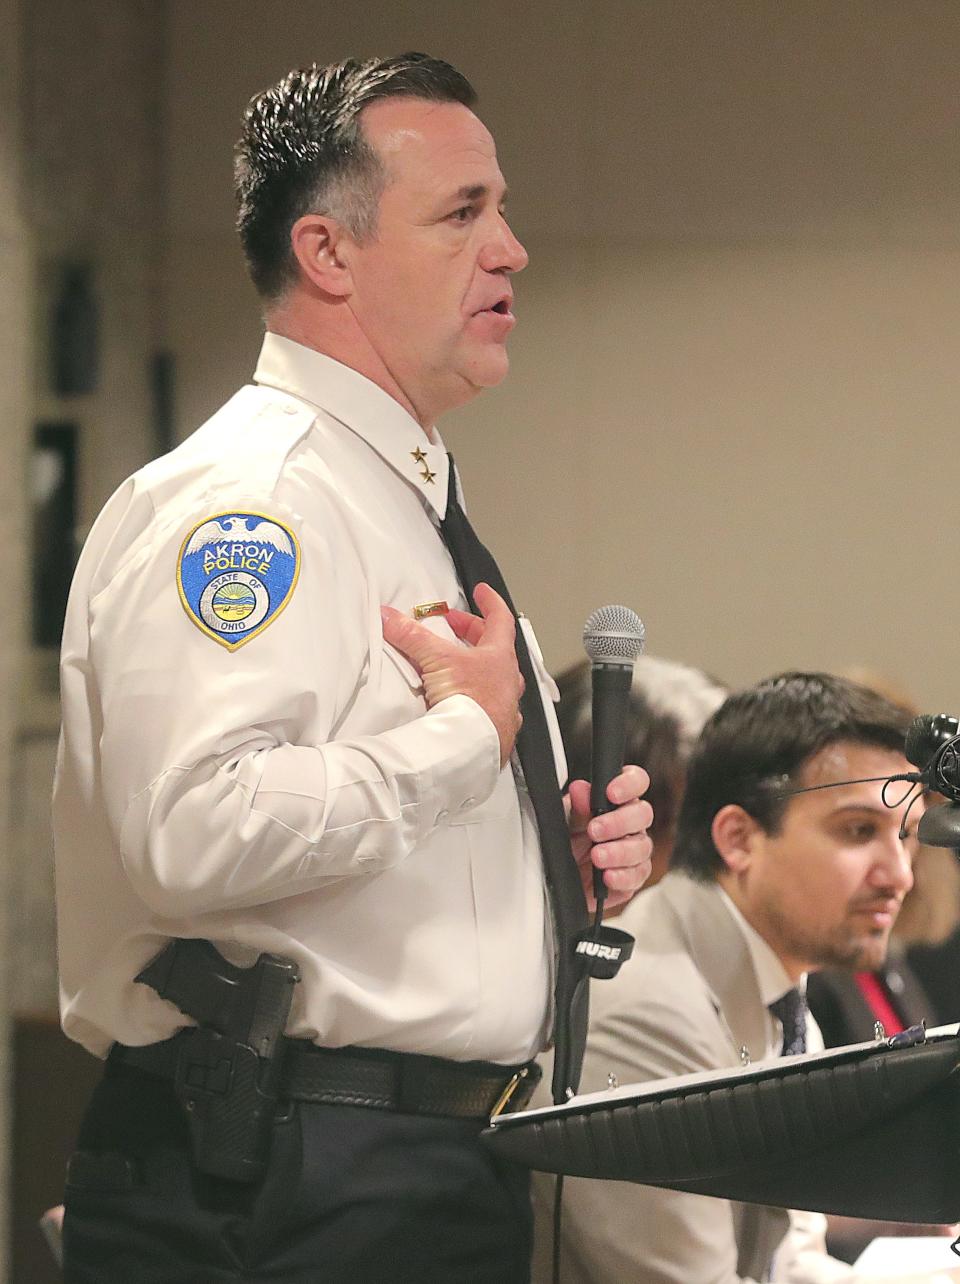 Acting Police Chief Brian Harding talks about the return of name tags for officers during a city of Akron news conference Thursday at the Ocasek Auditorium.